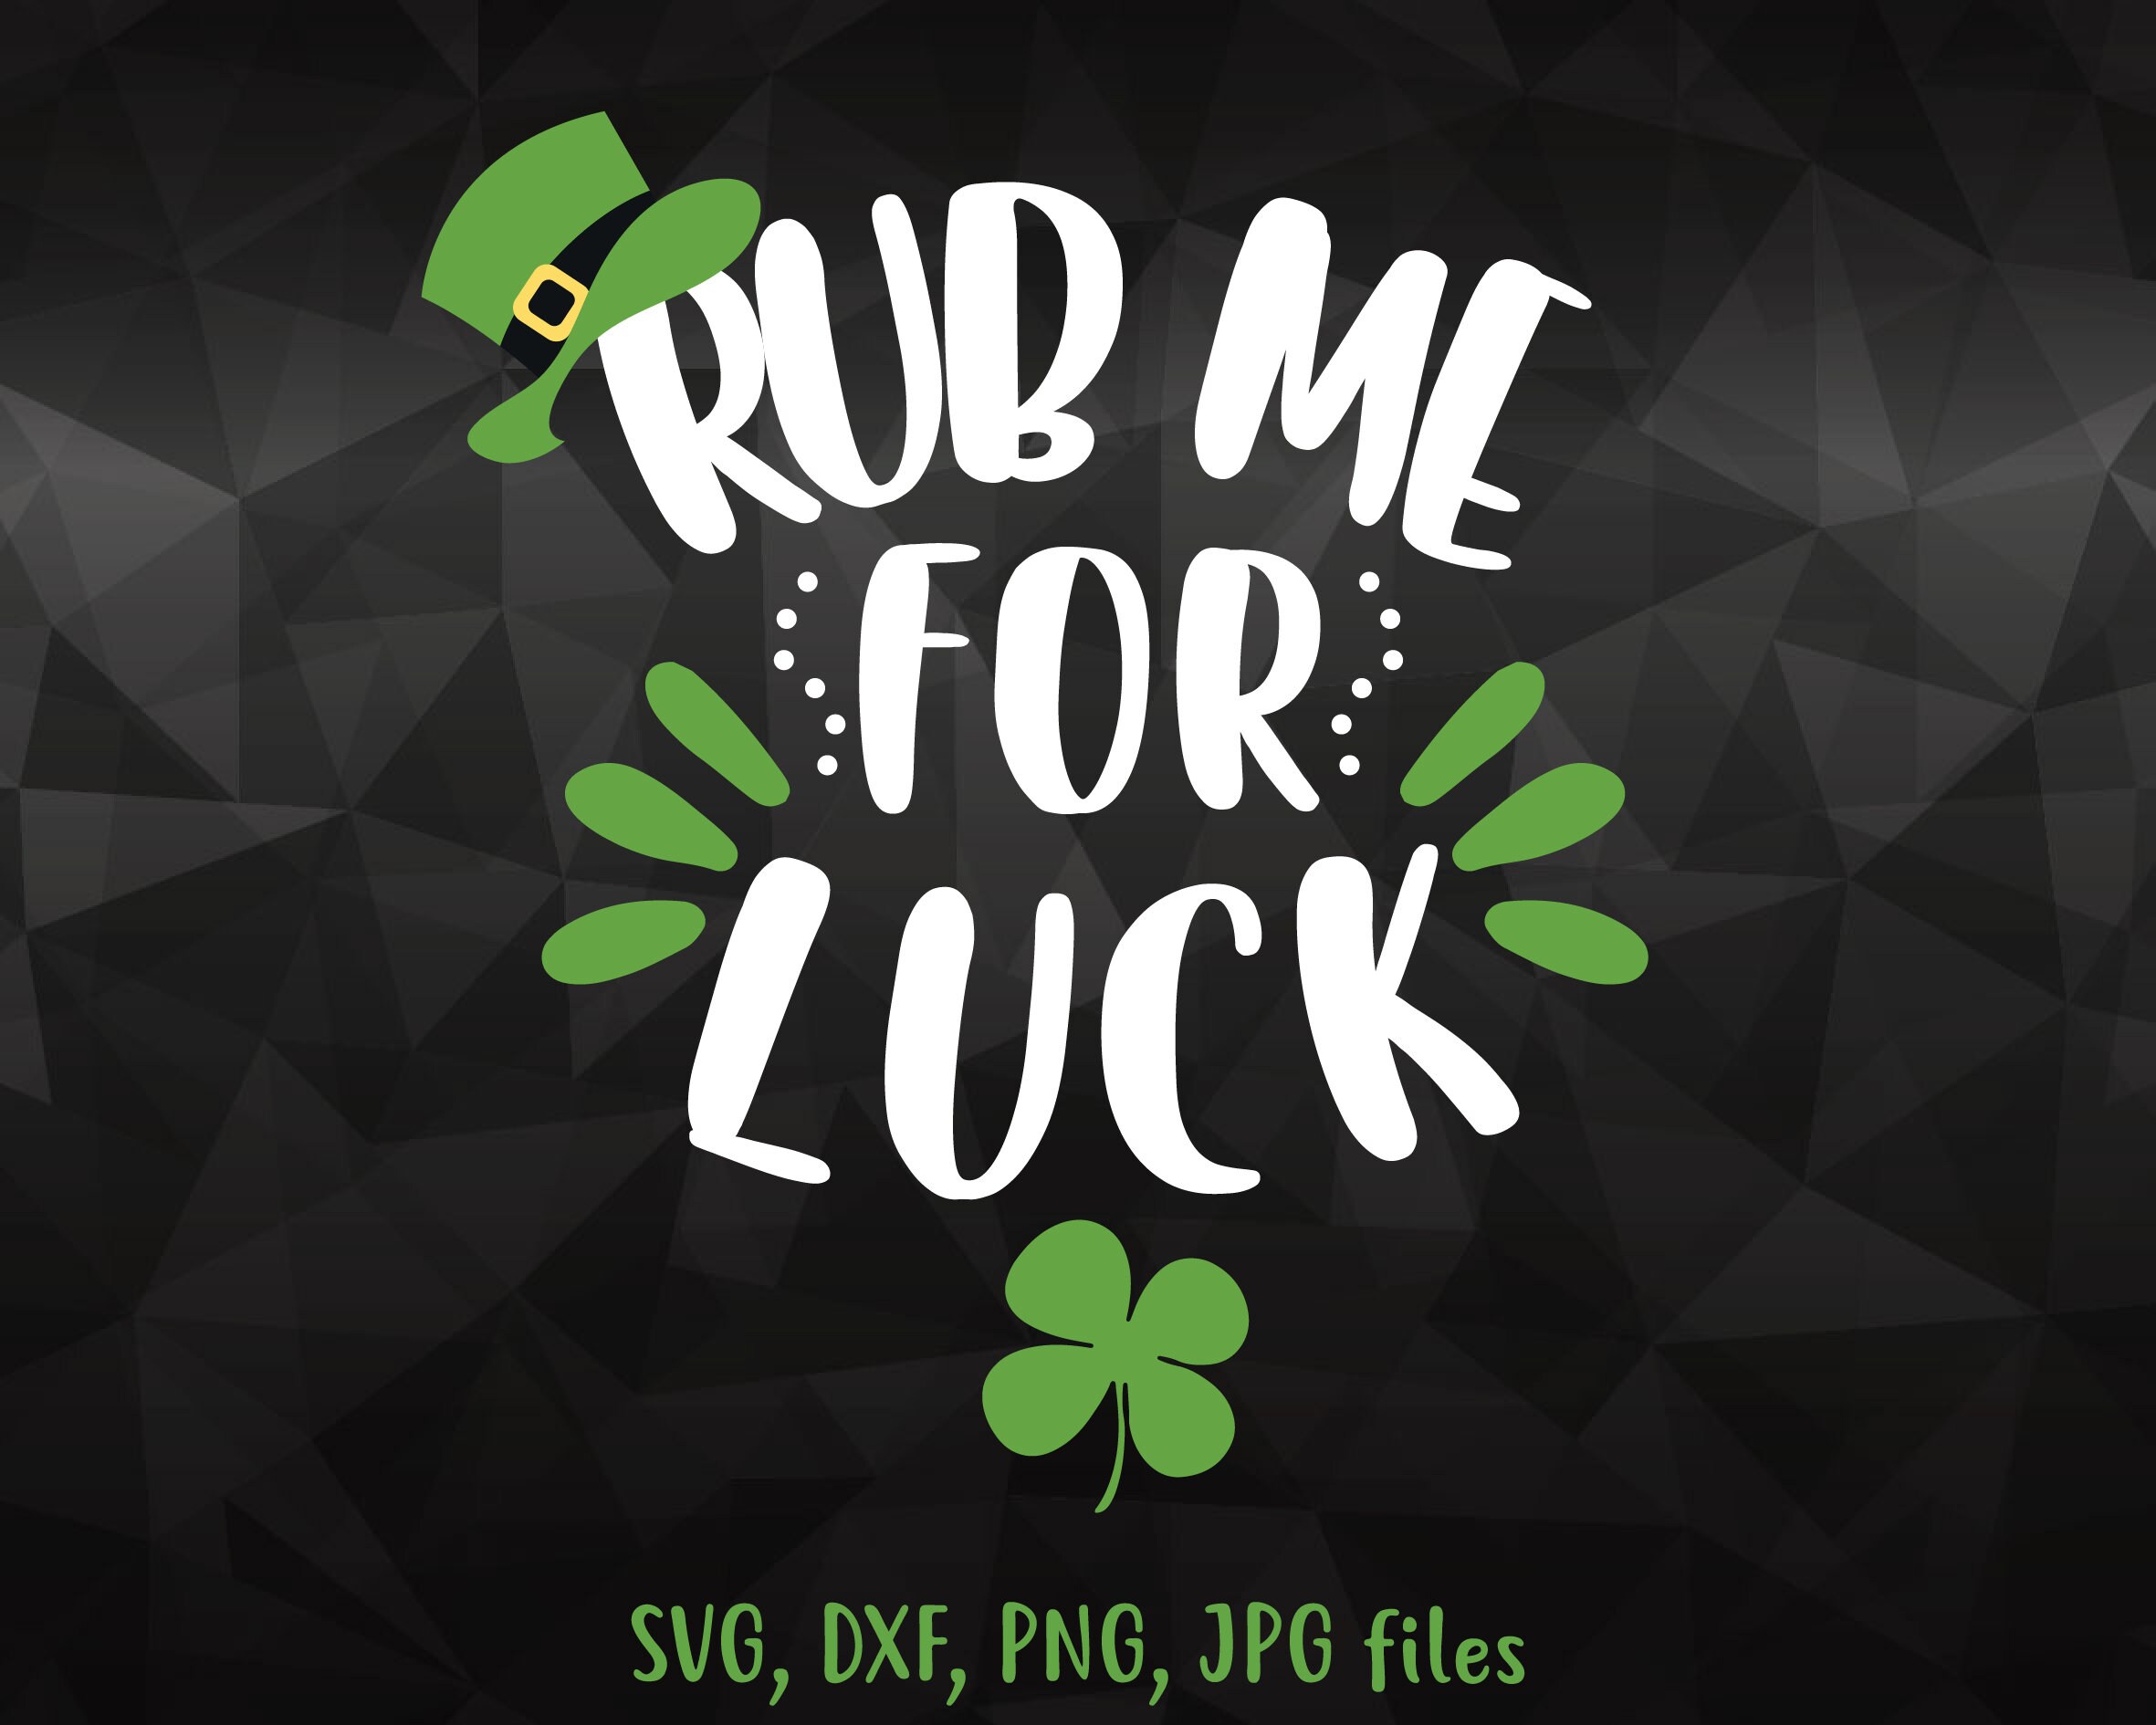 Rub Me for Luck St. Patrick's Pen, Pens With Sayings, Funny Gifts for Best  Friend, Funny Pens, St. Paddy's, Swear Word Gift, Stationary Pen 